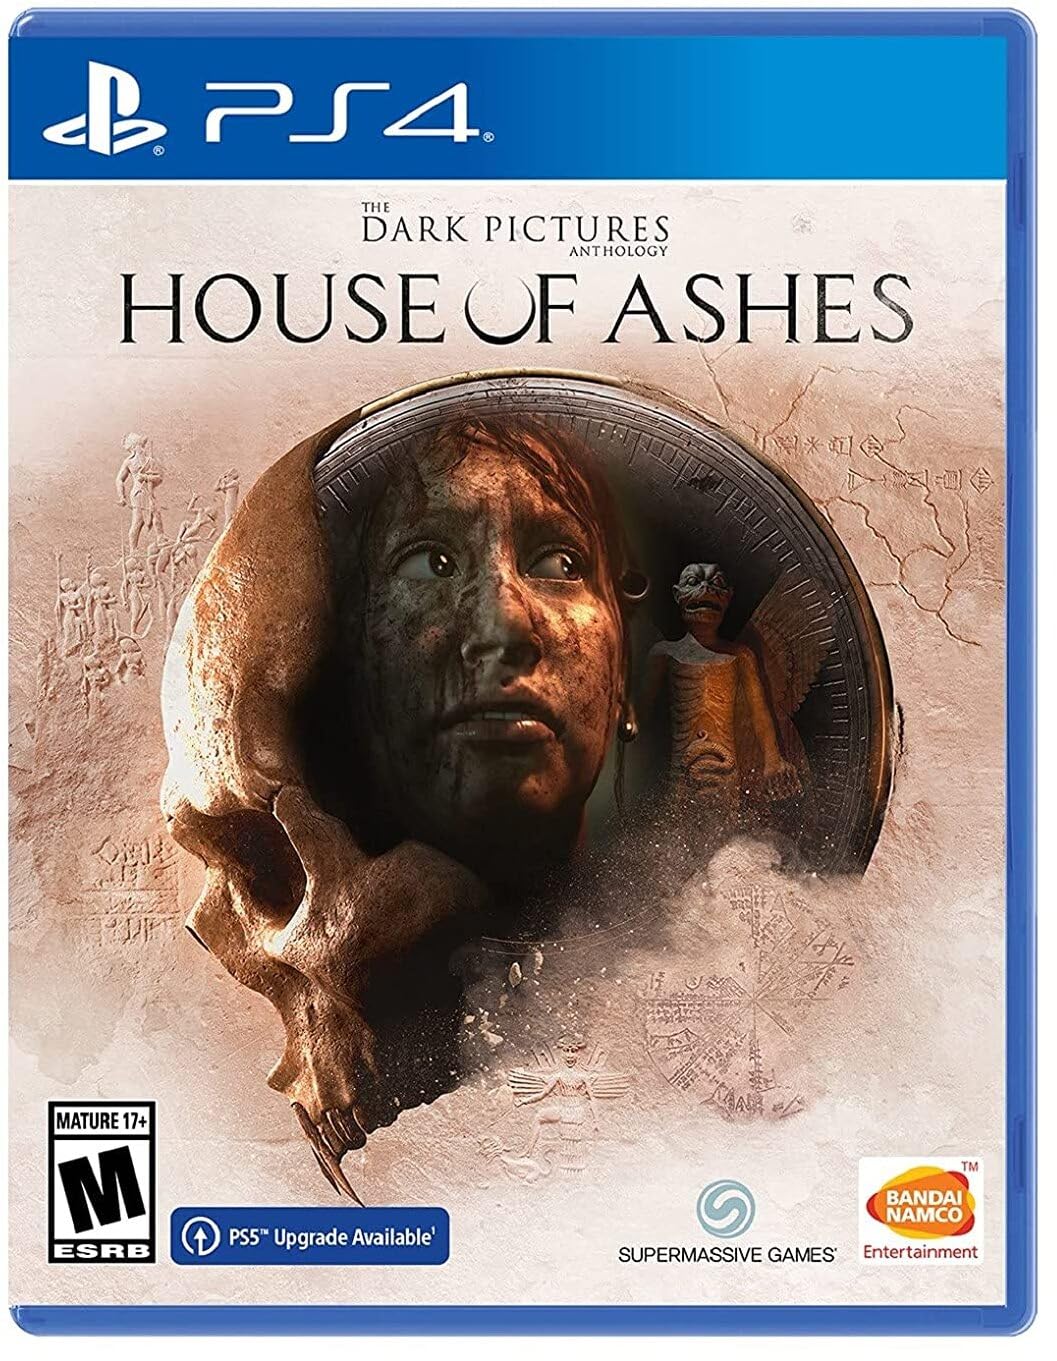 The Dark Pictures: House of Ashes(͢:)- PS4